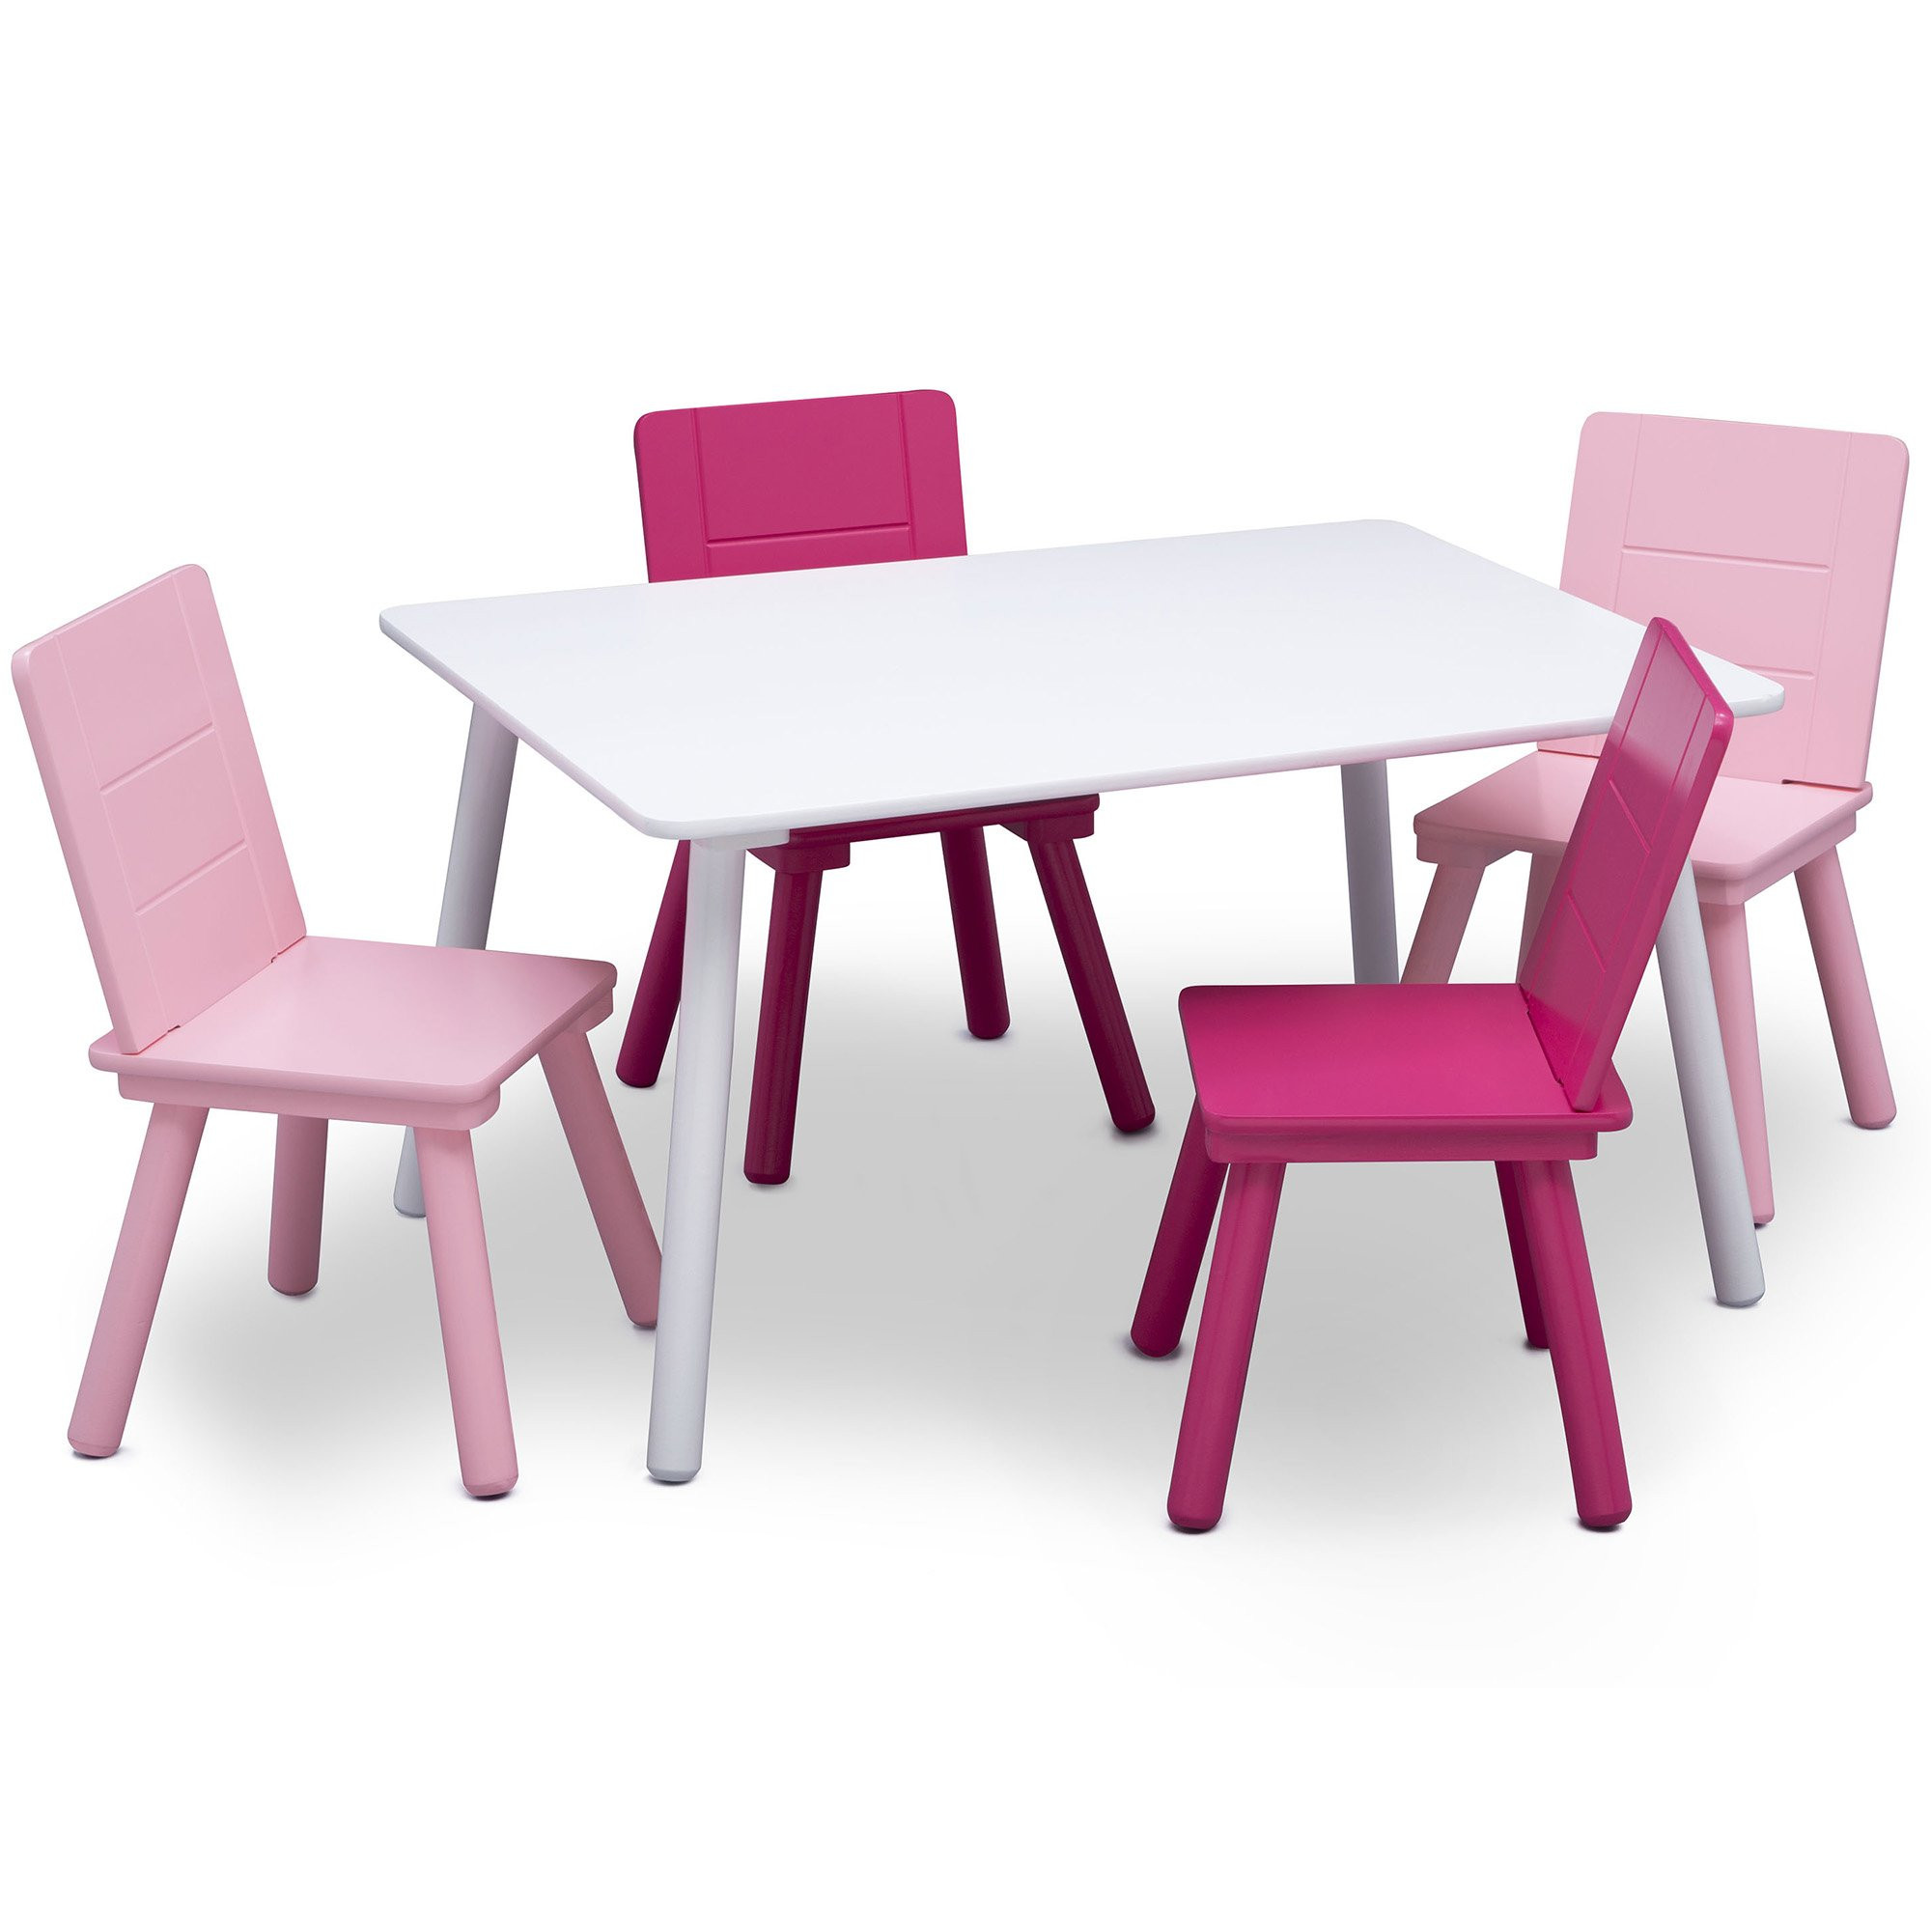 Amazon Kids Table And Chairs
 Amazon Delta Children Kids Chair Set and Table 4